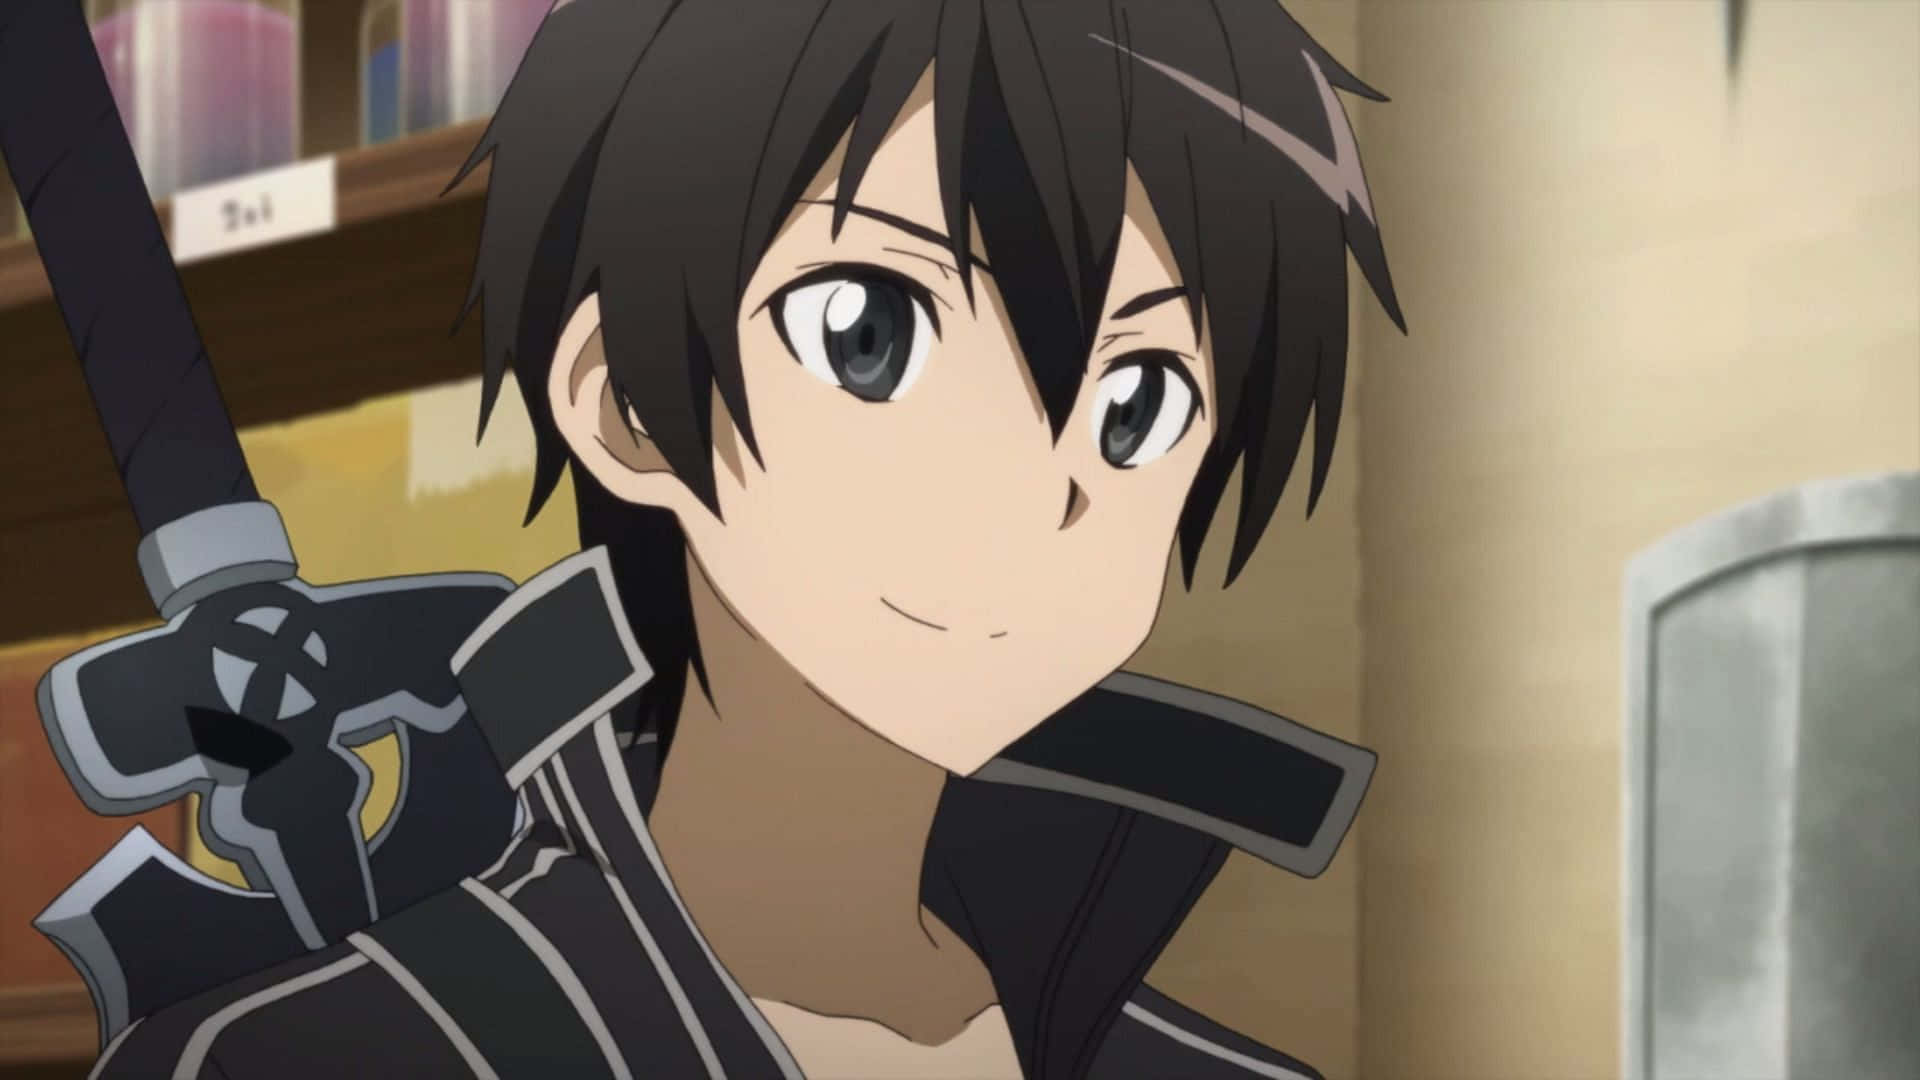 "Discovering new worlds with Sword Art Online"